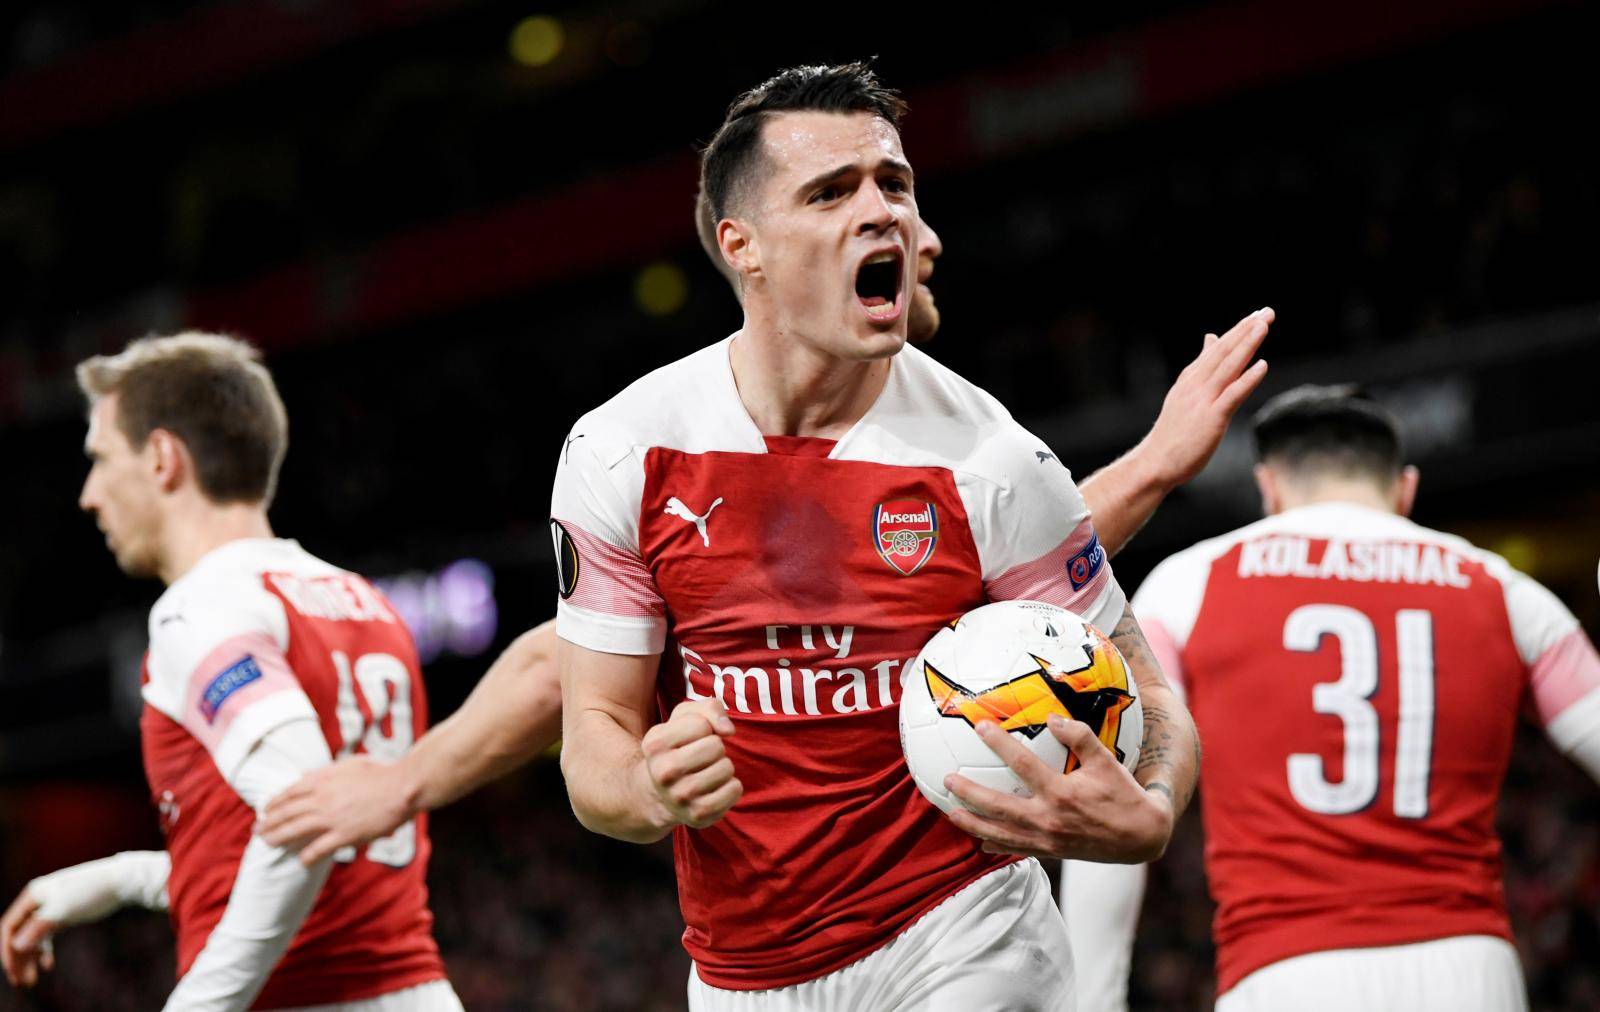 Europa League - Round of 16 Second Leg - Arsenal v Stade Rennes